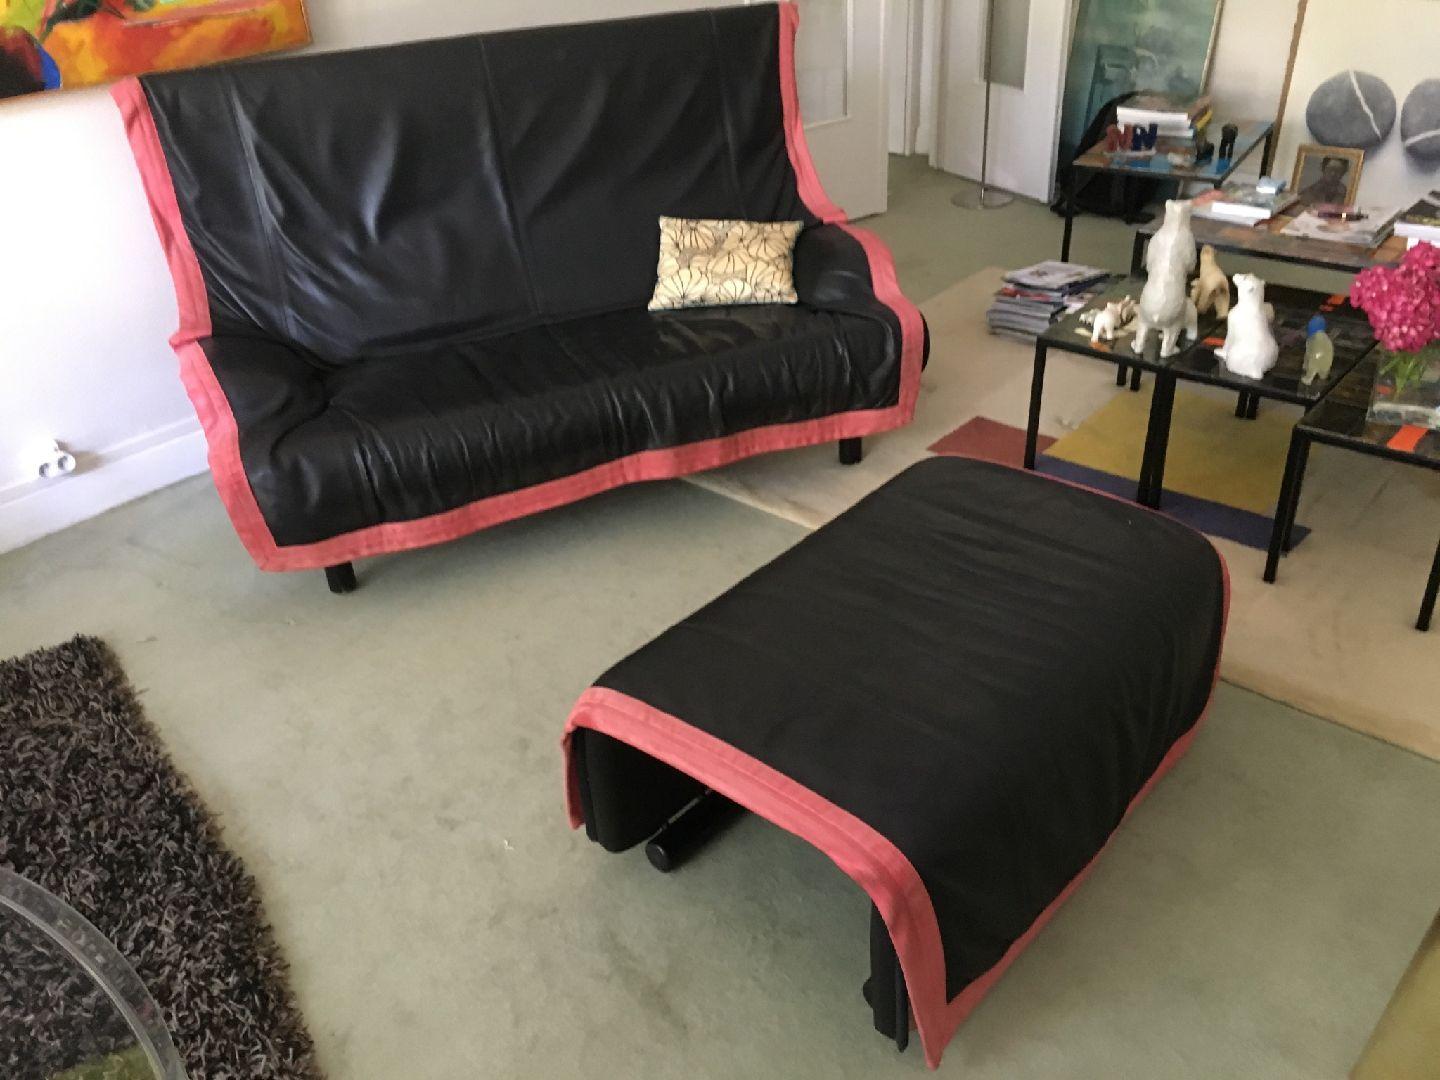 Sofa and ottoman
by Vico Magistretti
for Cassina
Black leather and red strap
Measures: Sofa width 171 cm
Ottoman width 103 cm,
circa 1990.
1500 Euros the two pieces.